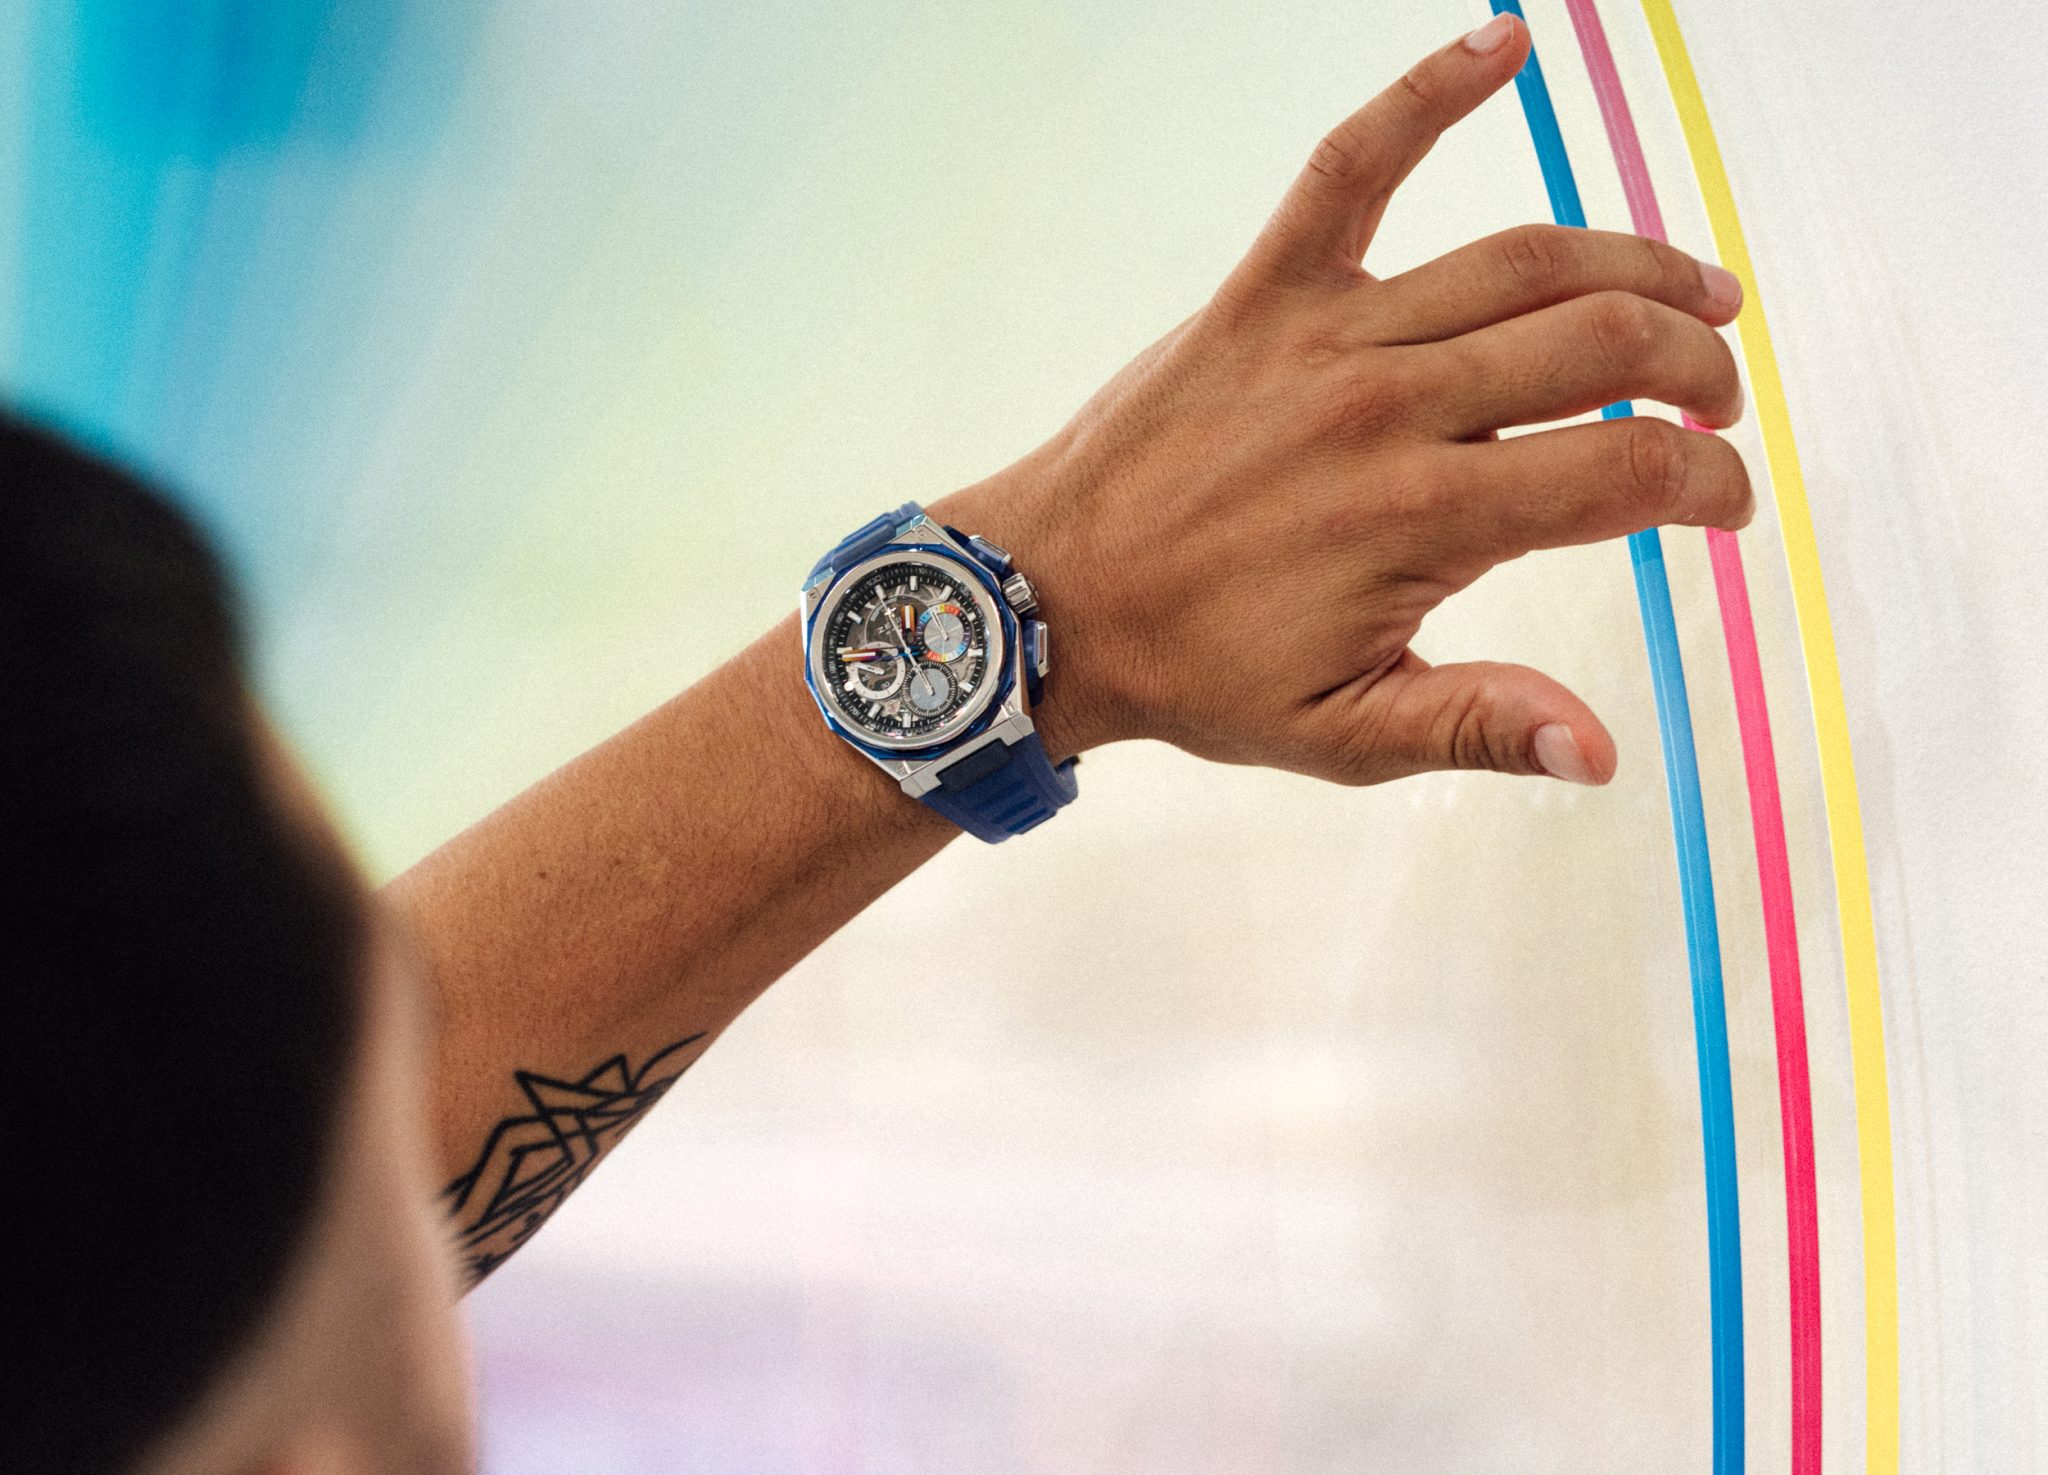 the DEFY 21 felipe pantone for zenith explores high-frequency in